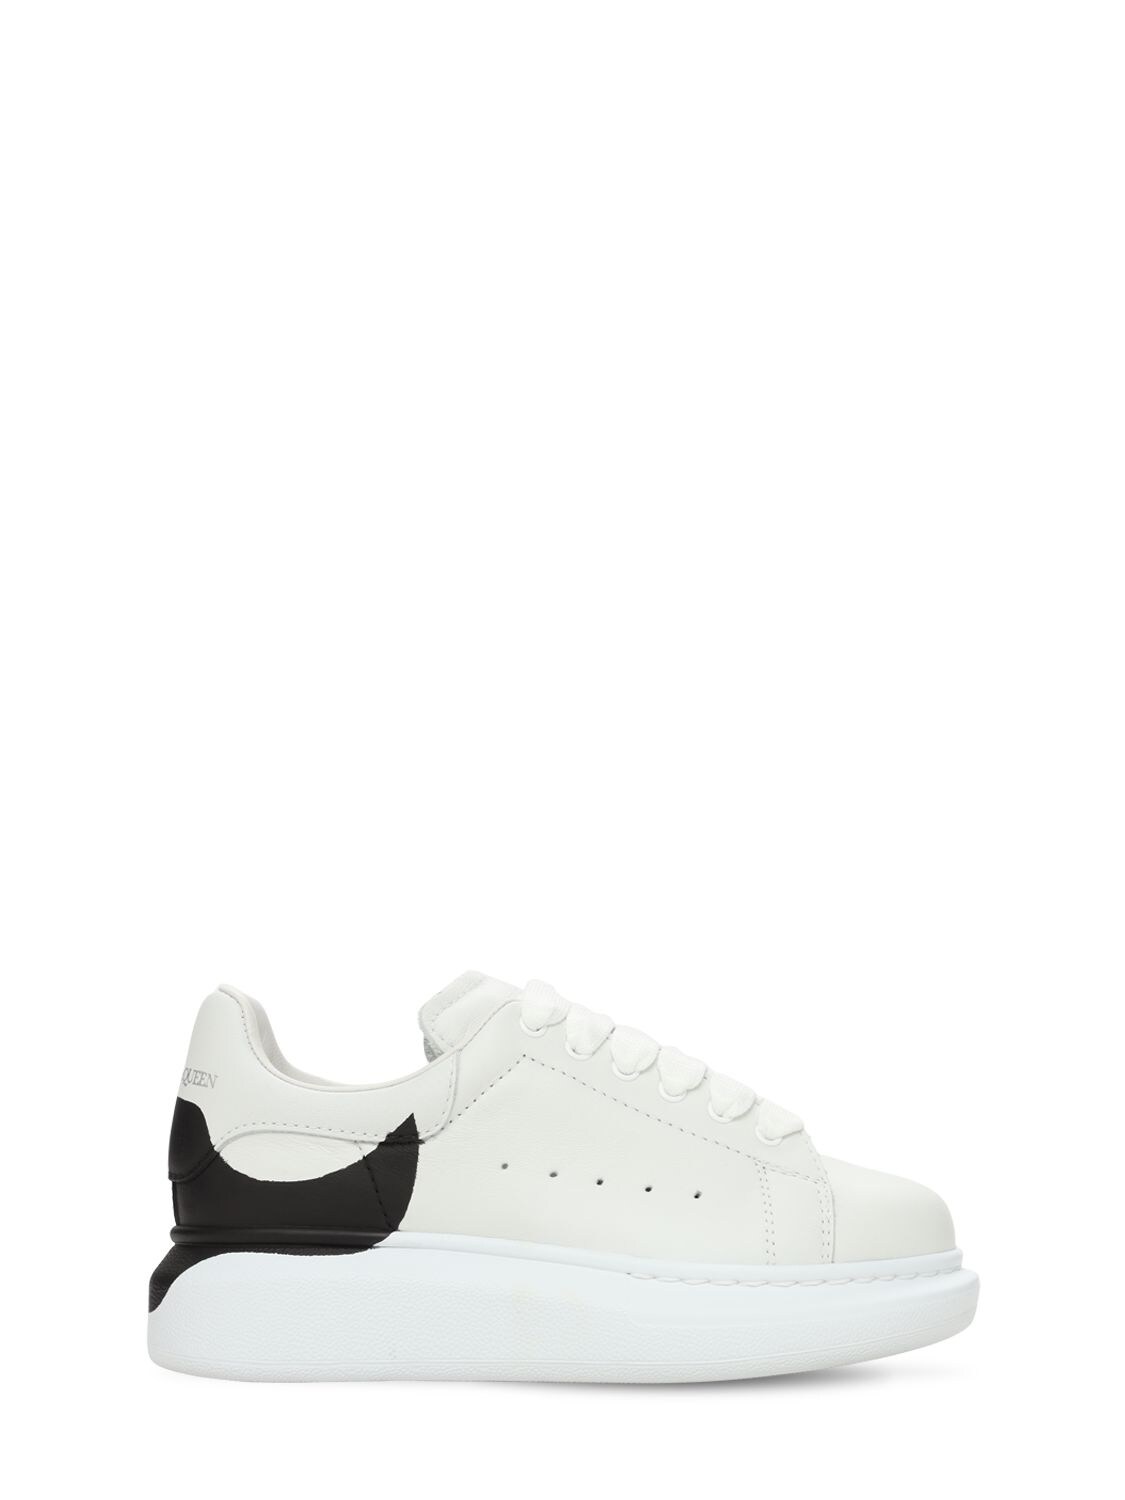 ALEXANDER MCQUEEN LEATHER LACE-UP SNEAKERS,73ILXS006-OTA2MQ2